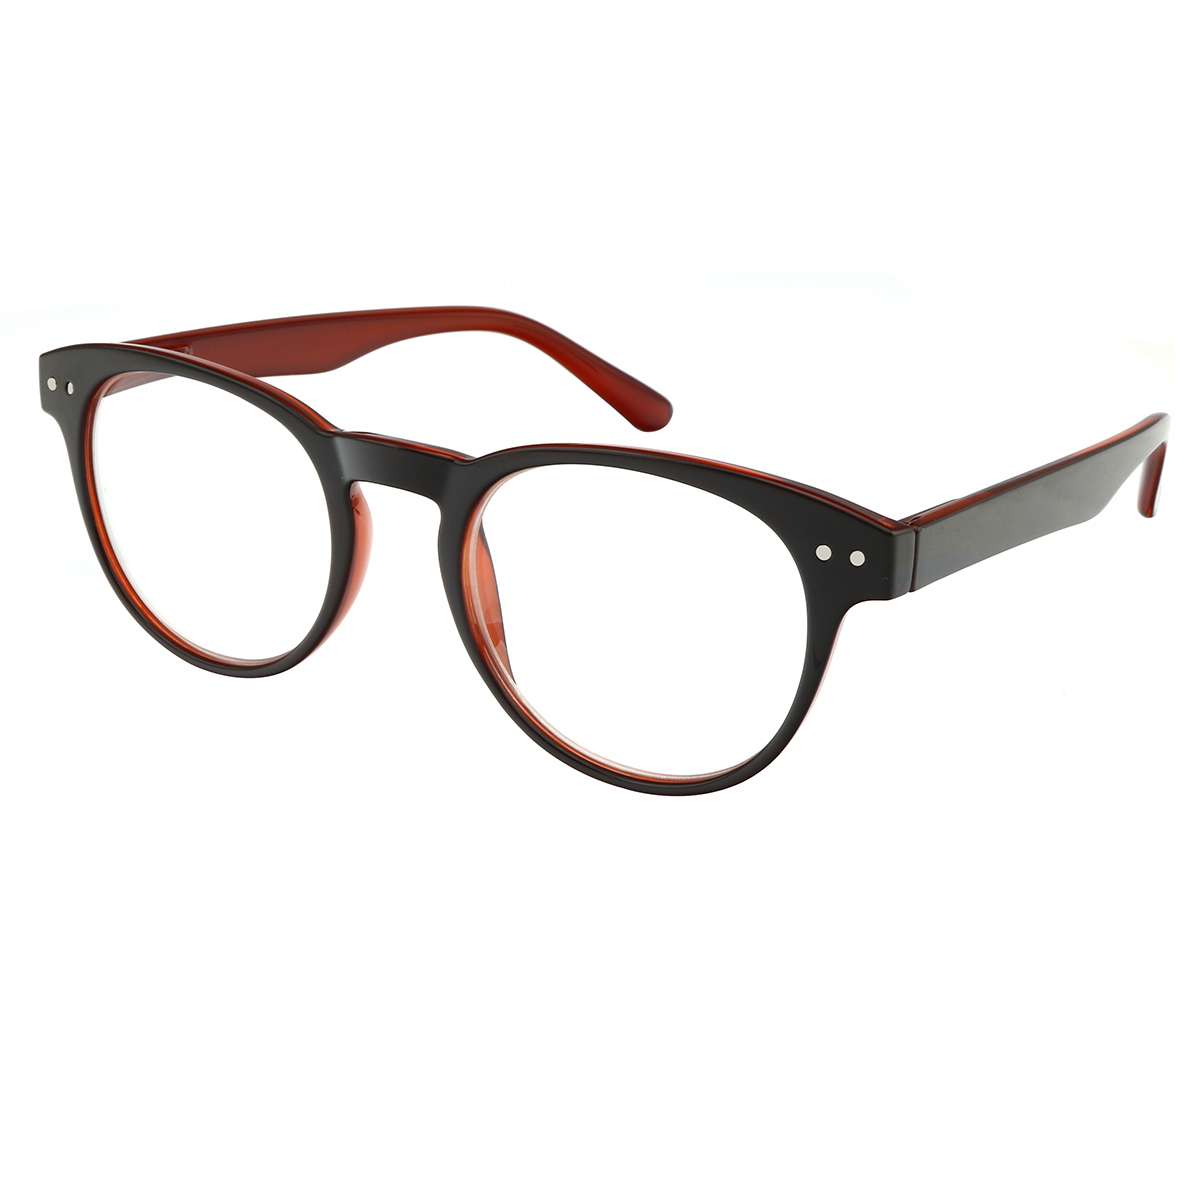 Thrace - Round Brown Reading Glasses for Women